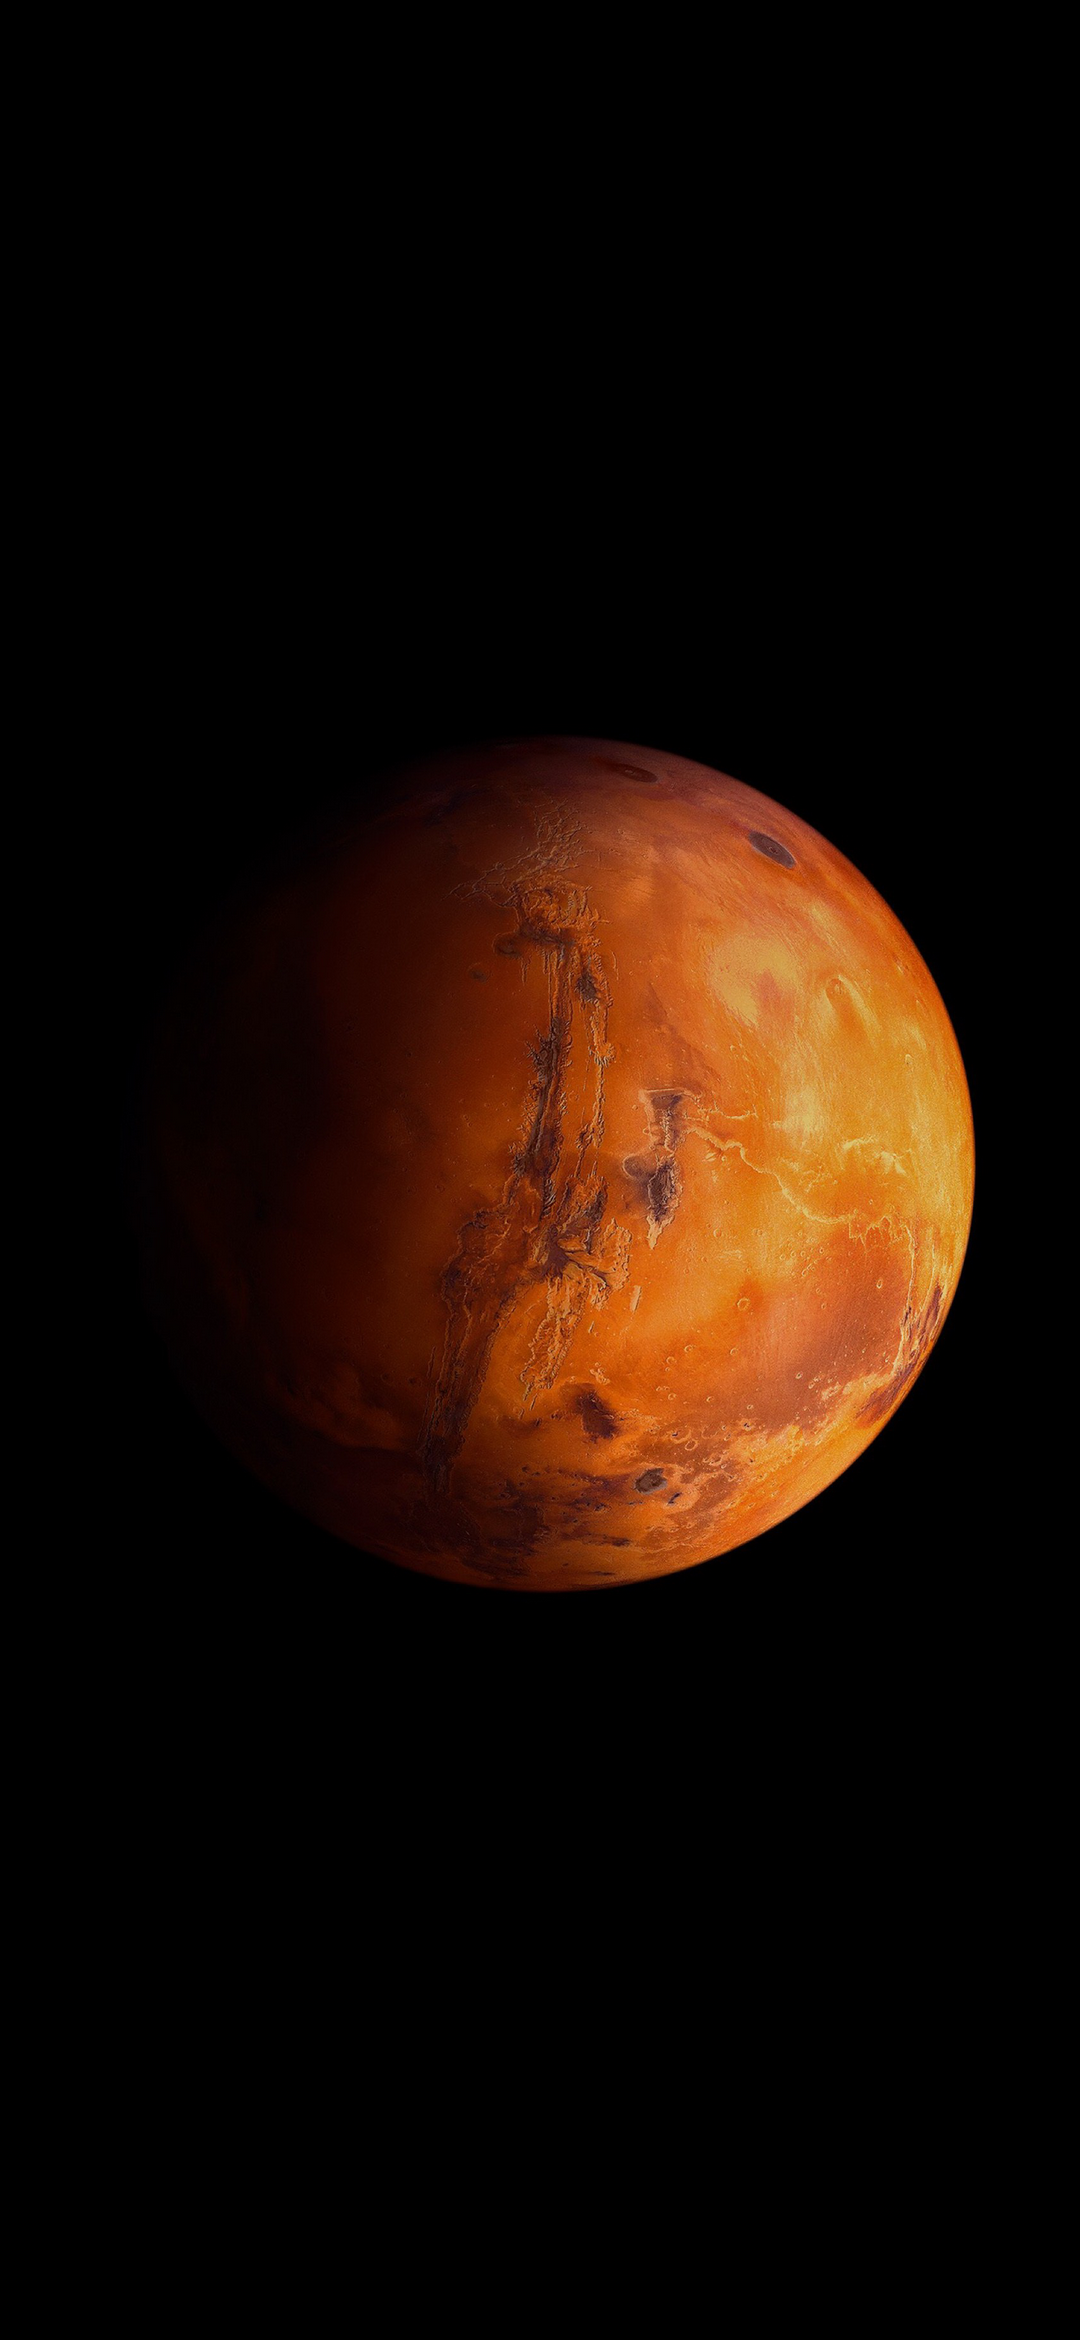 350 Mars Pictures HQ  Download Free Images  Stock Photos on Unsplash